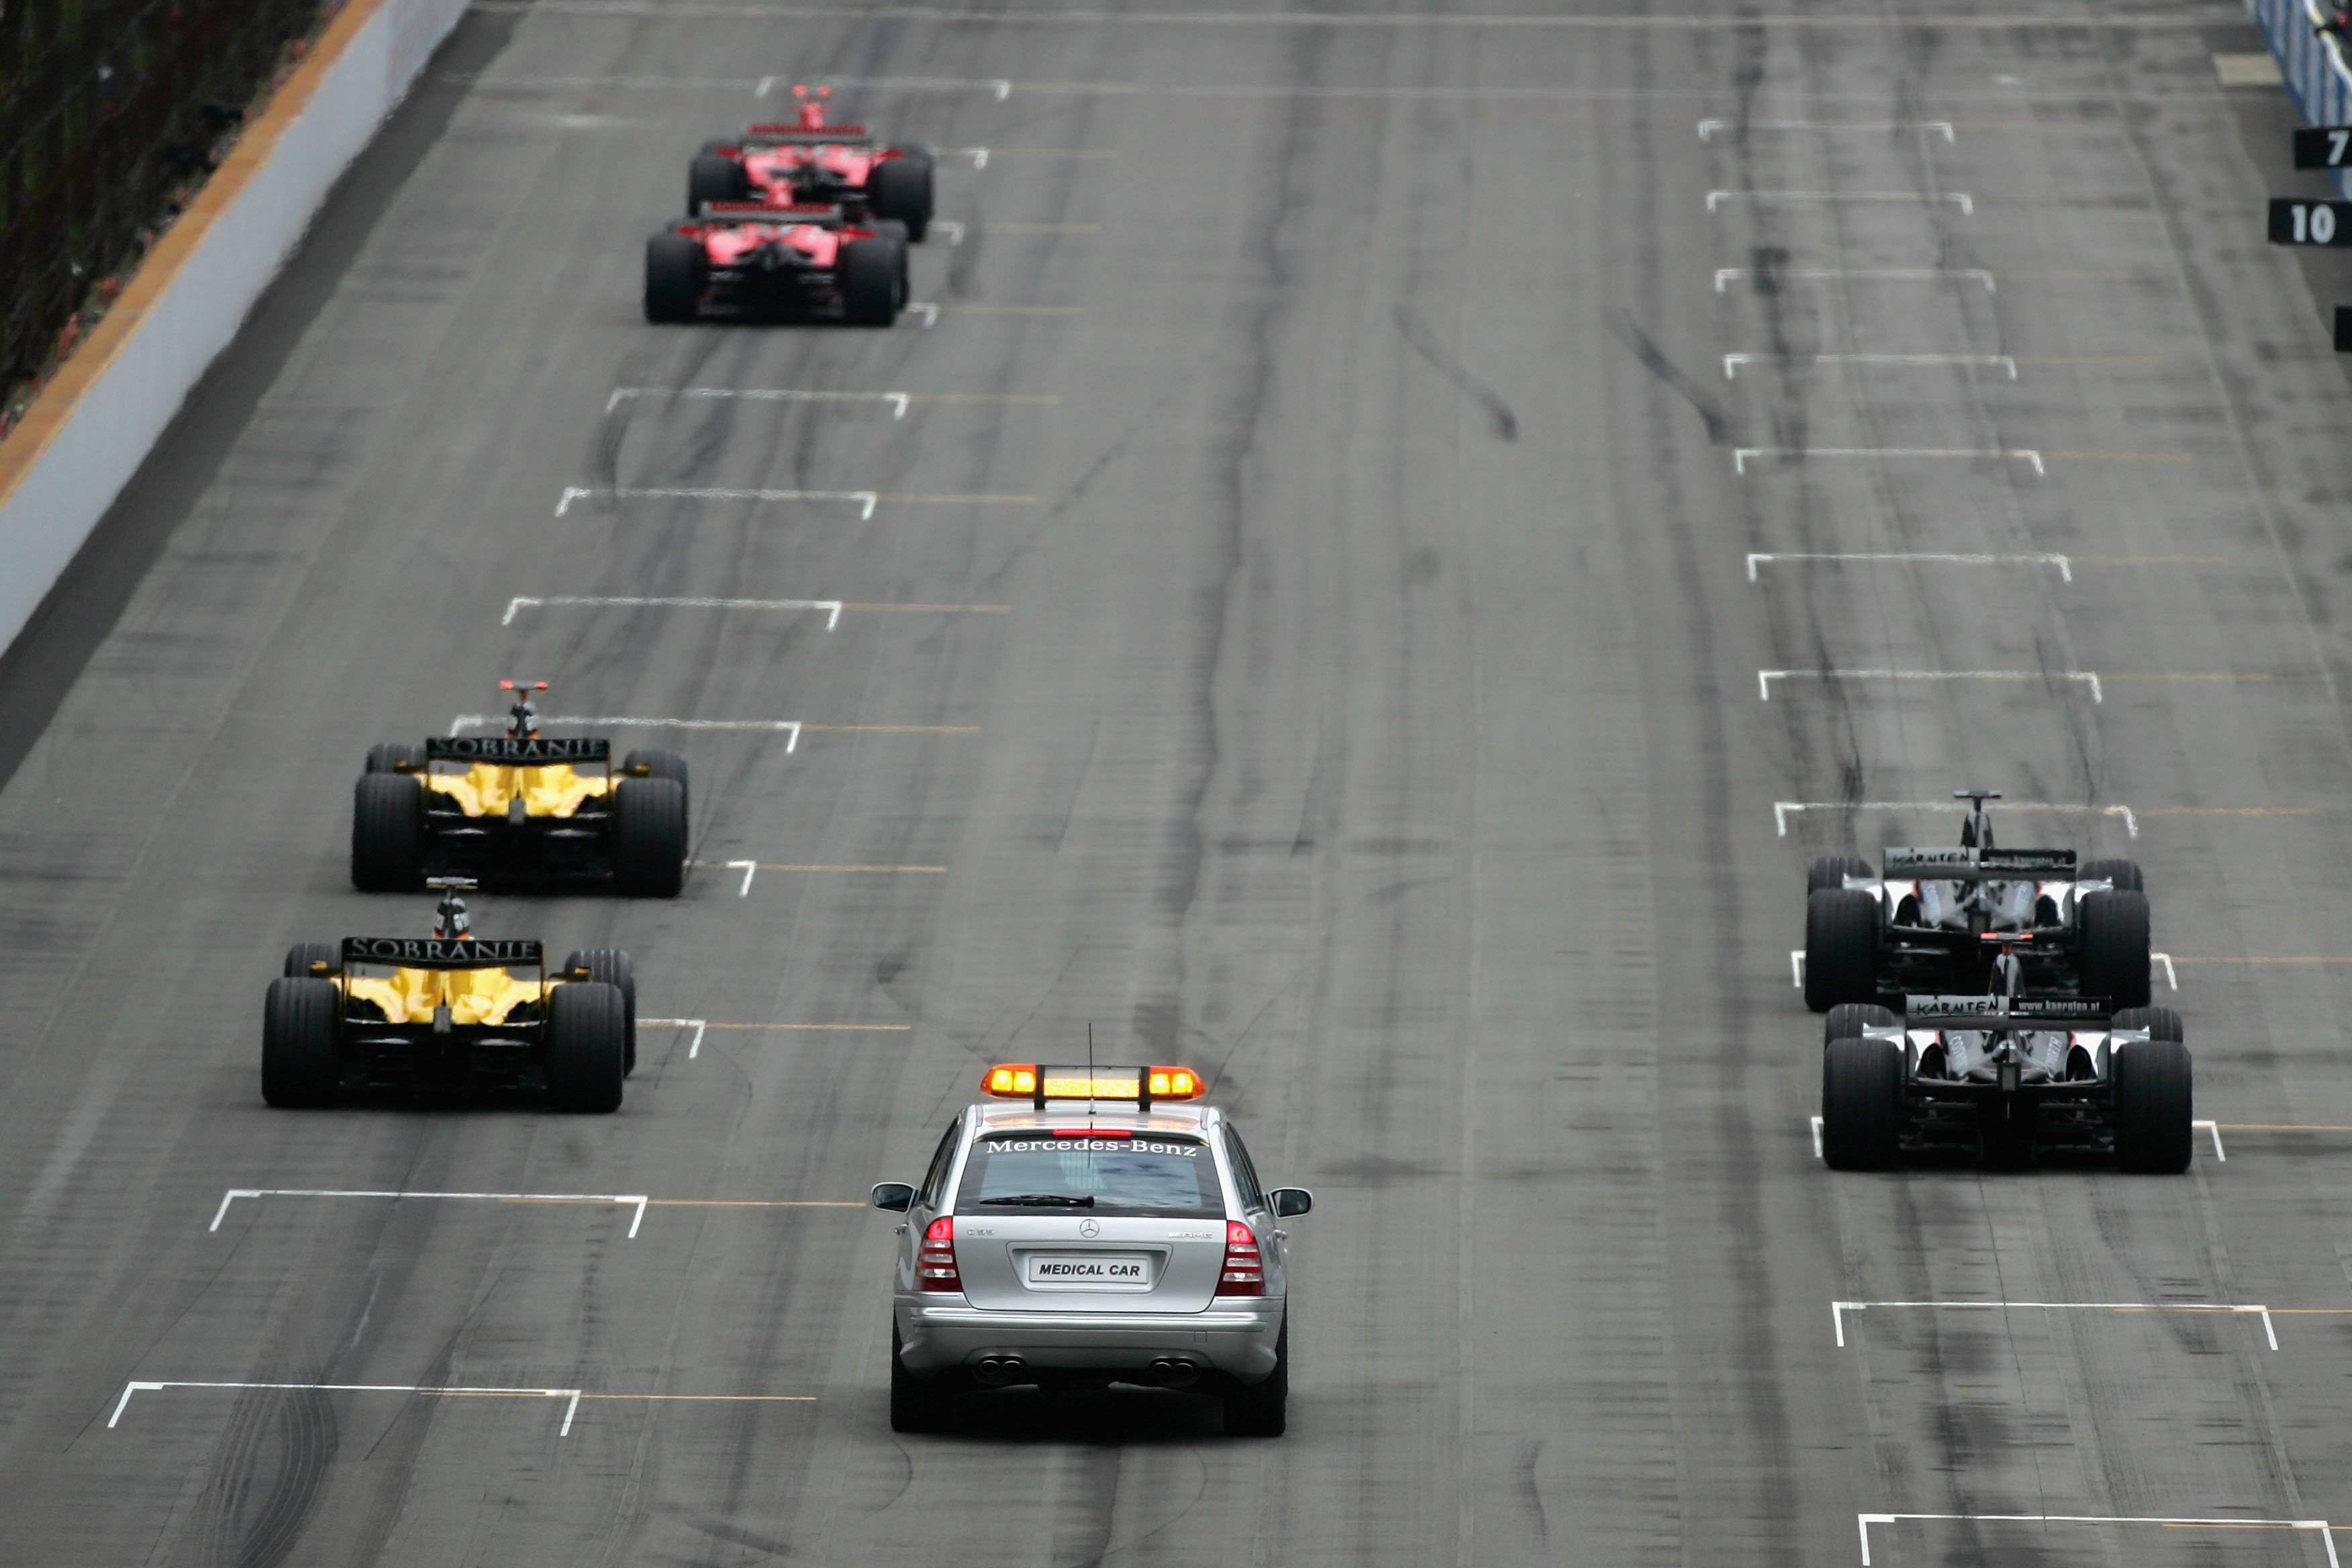 2005 US GP Starting Grid, with only six cars